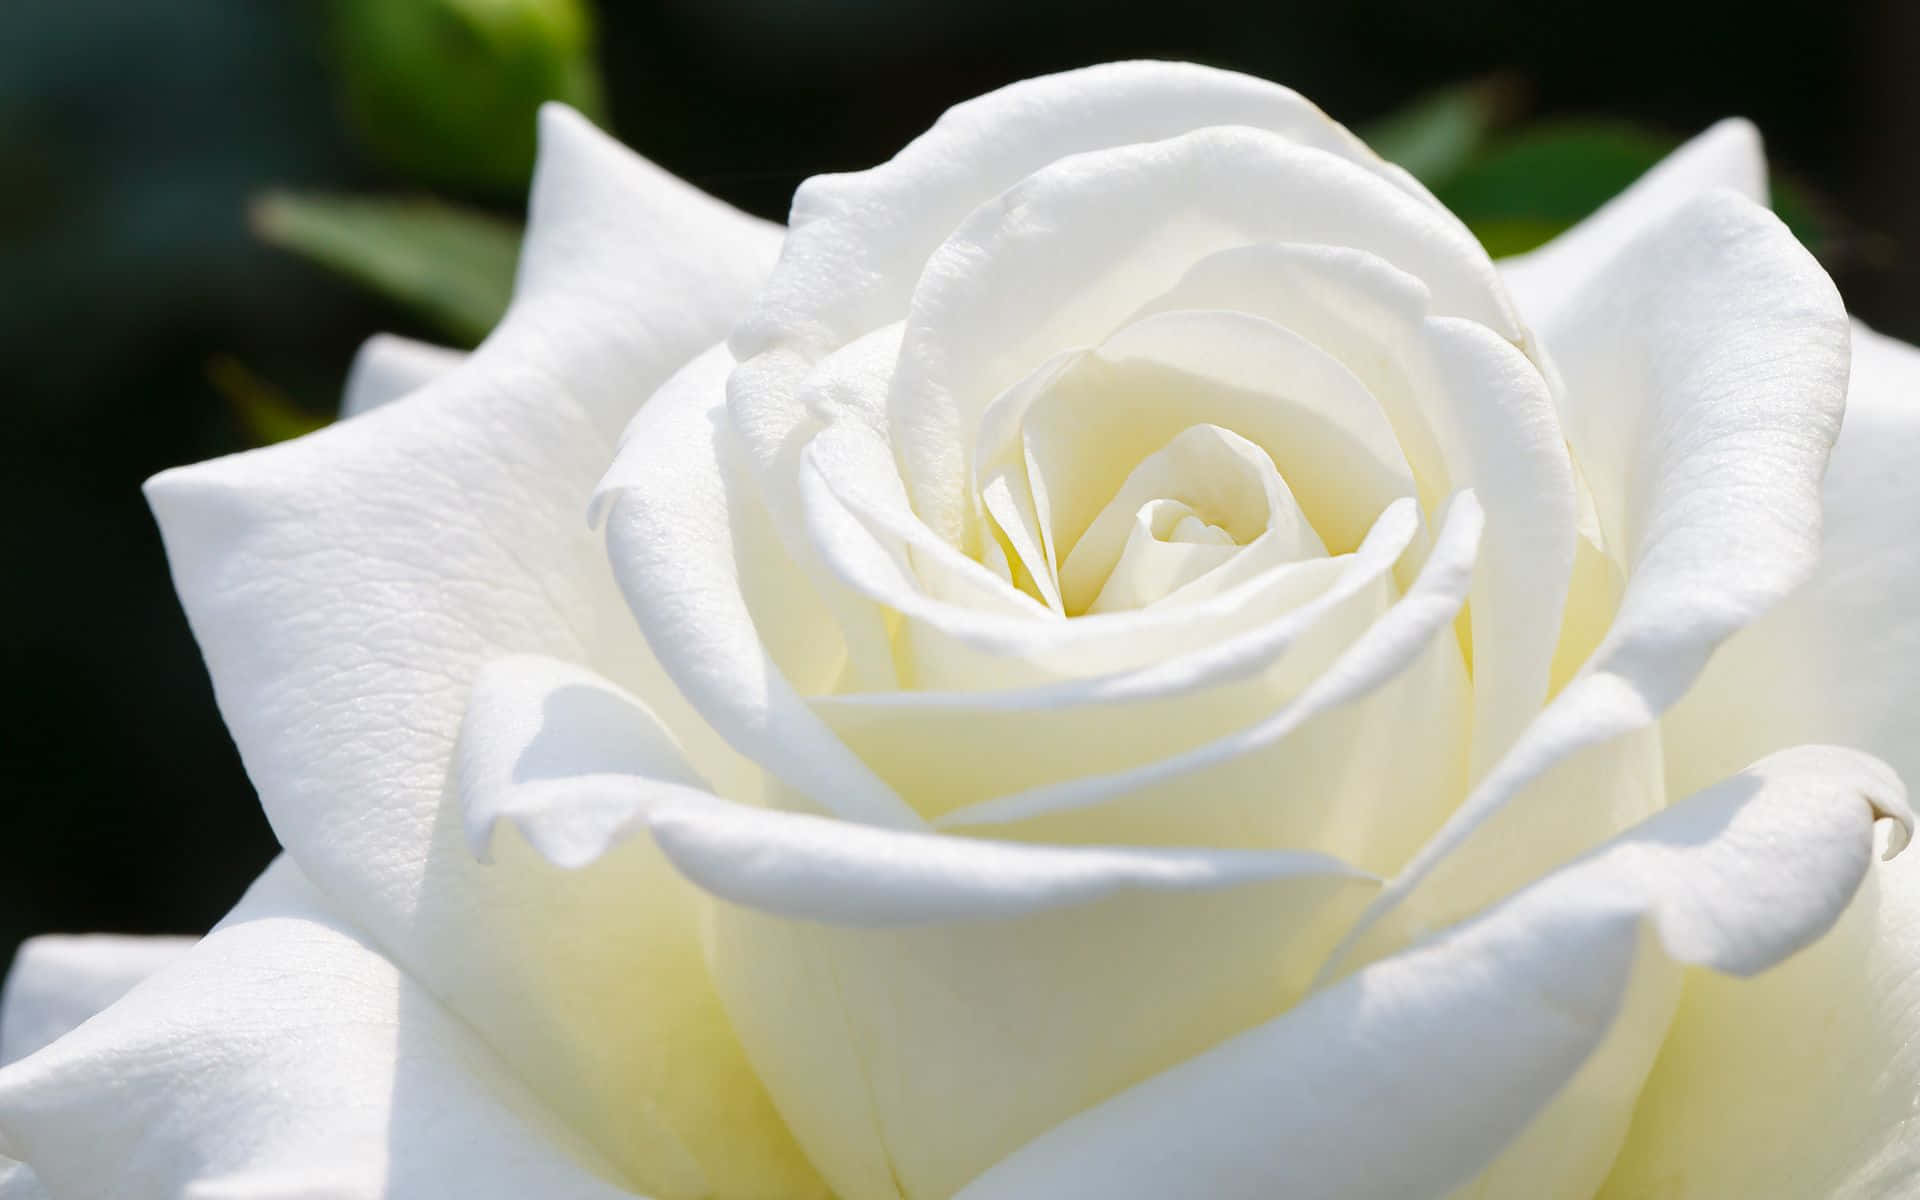 A beautiful white rose showing its delicate petals Wallpaper